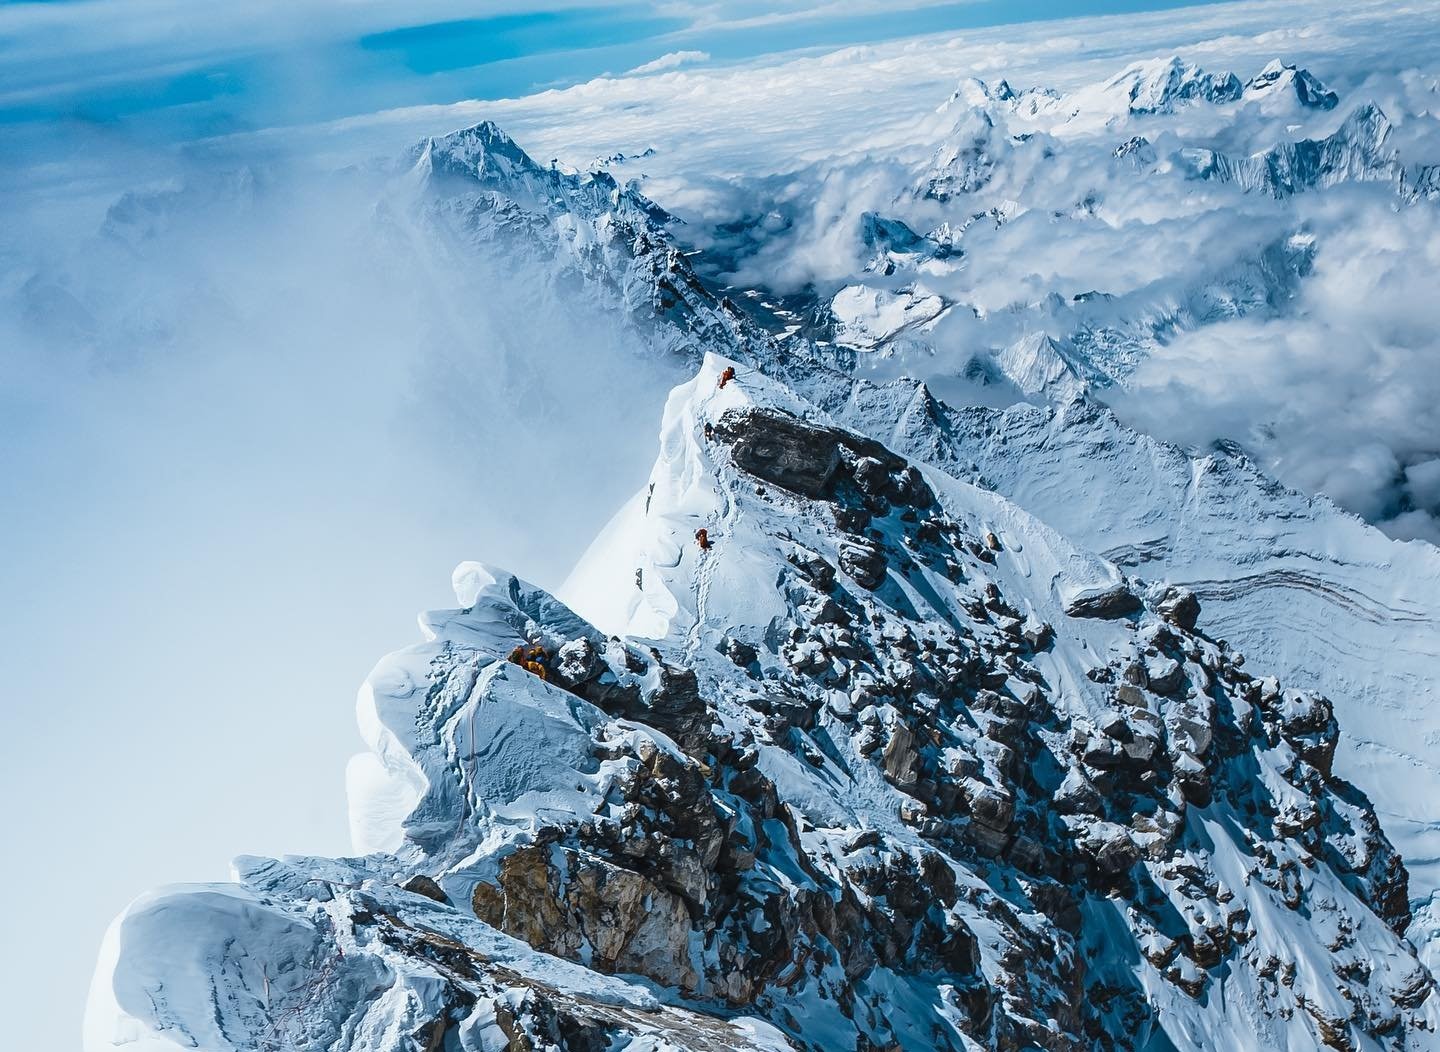 Himalaya seen from Top of Mount Everest 